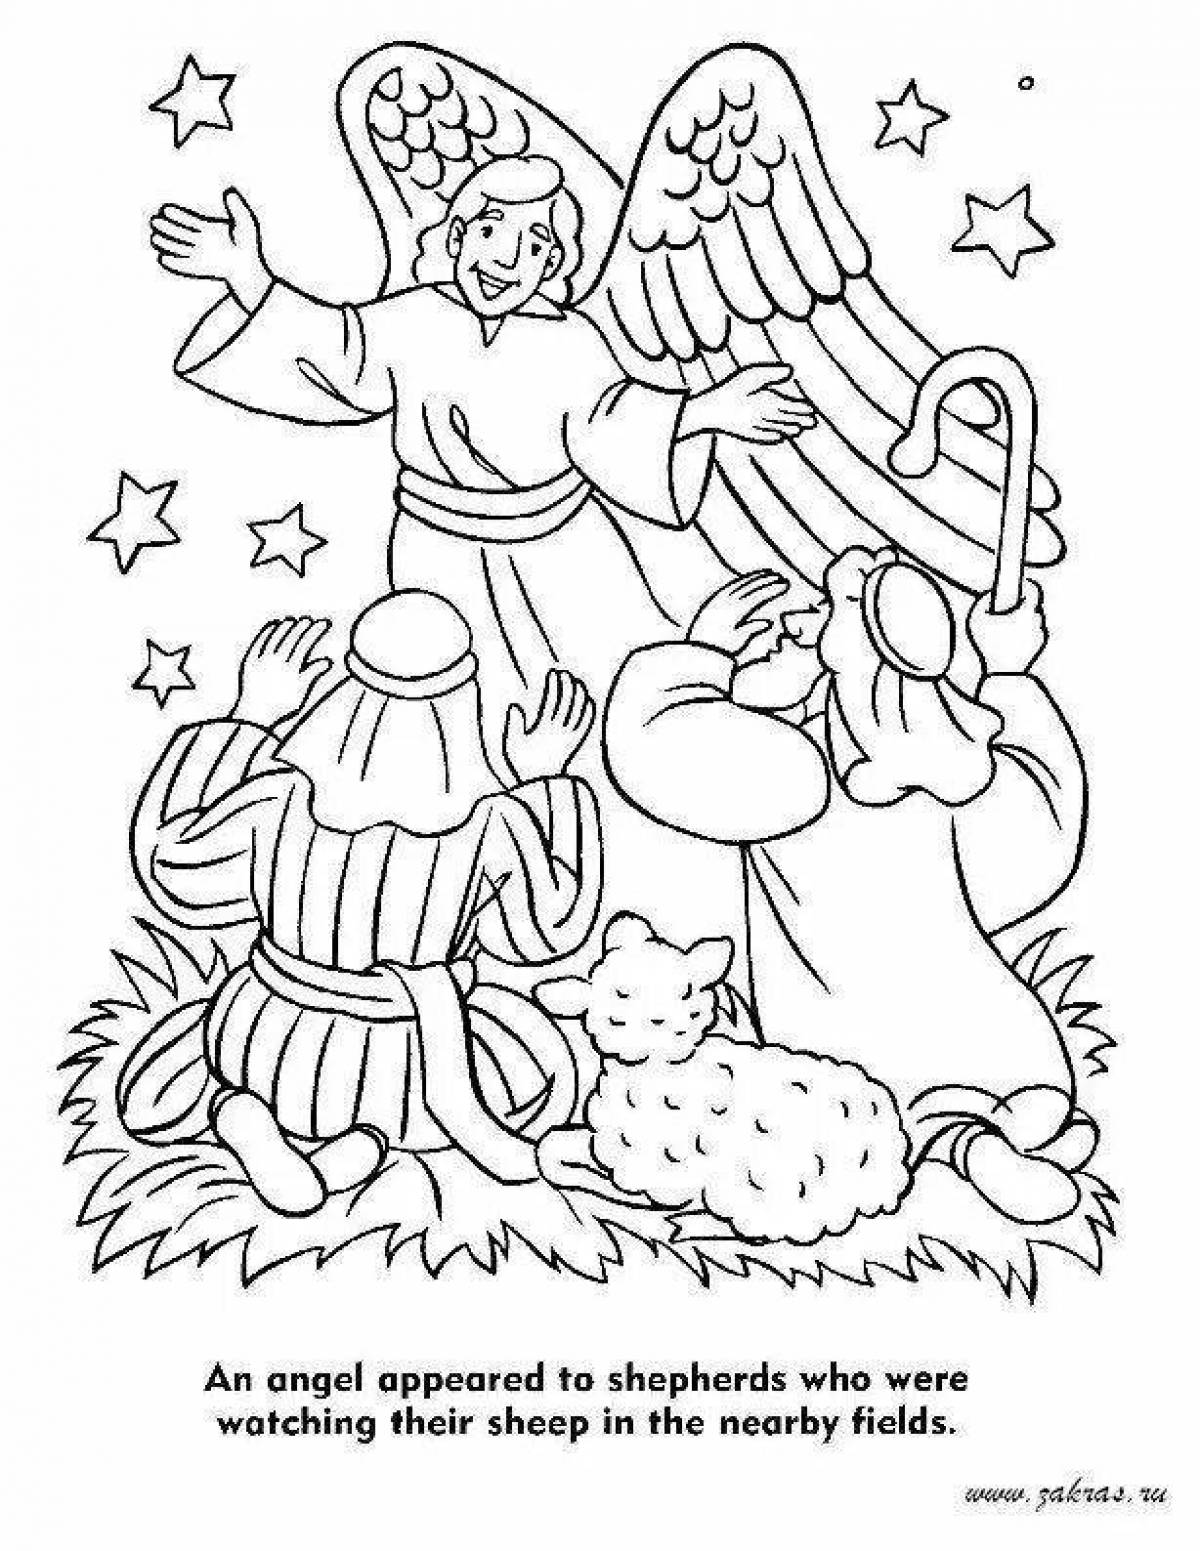 Charming merry christmas coloring book